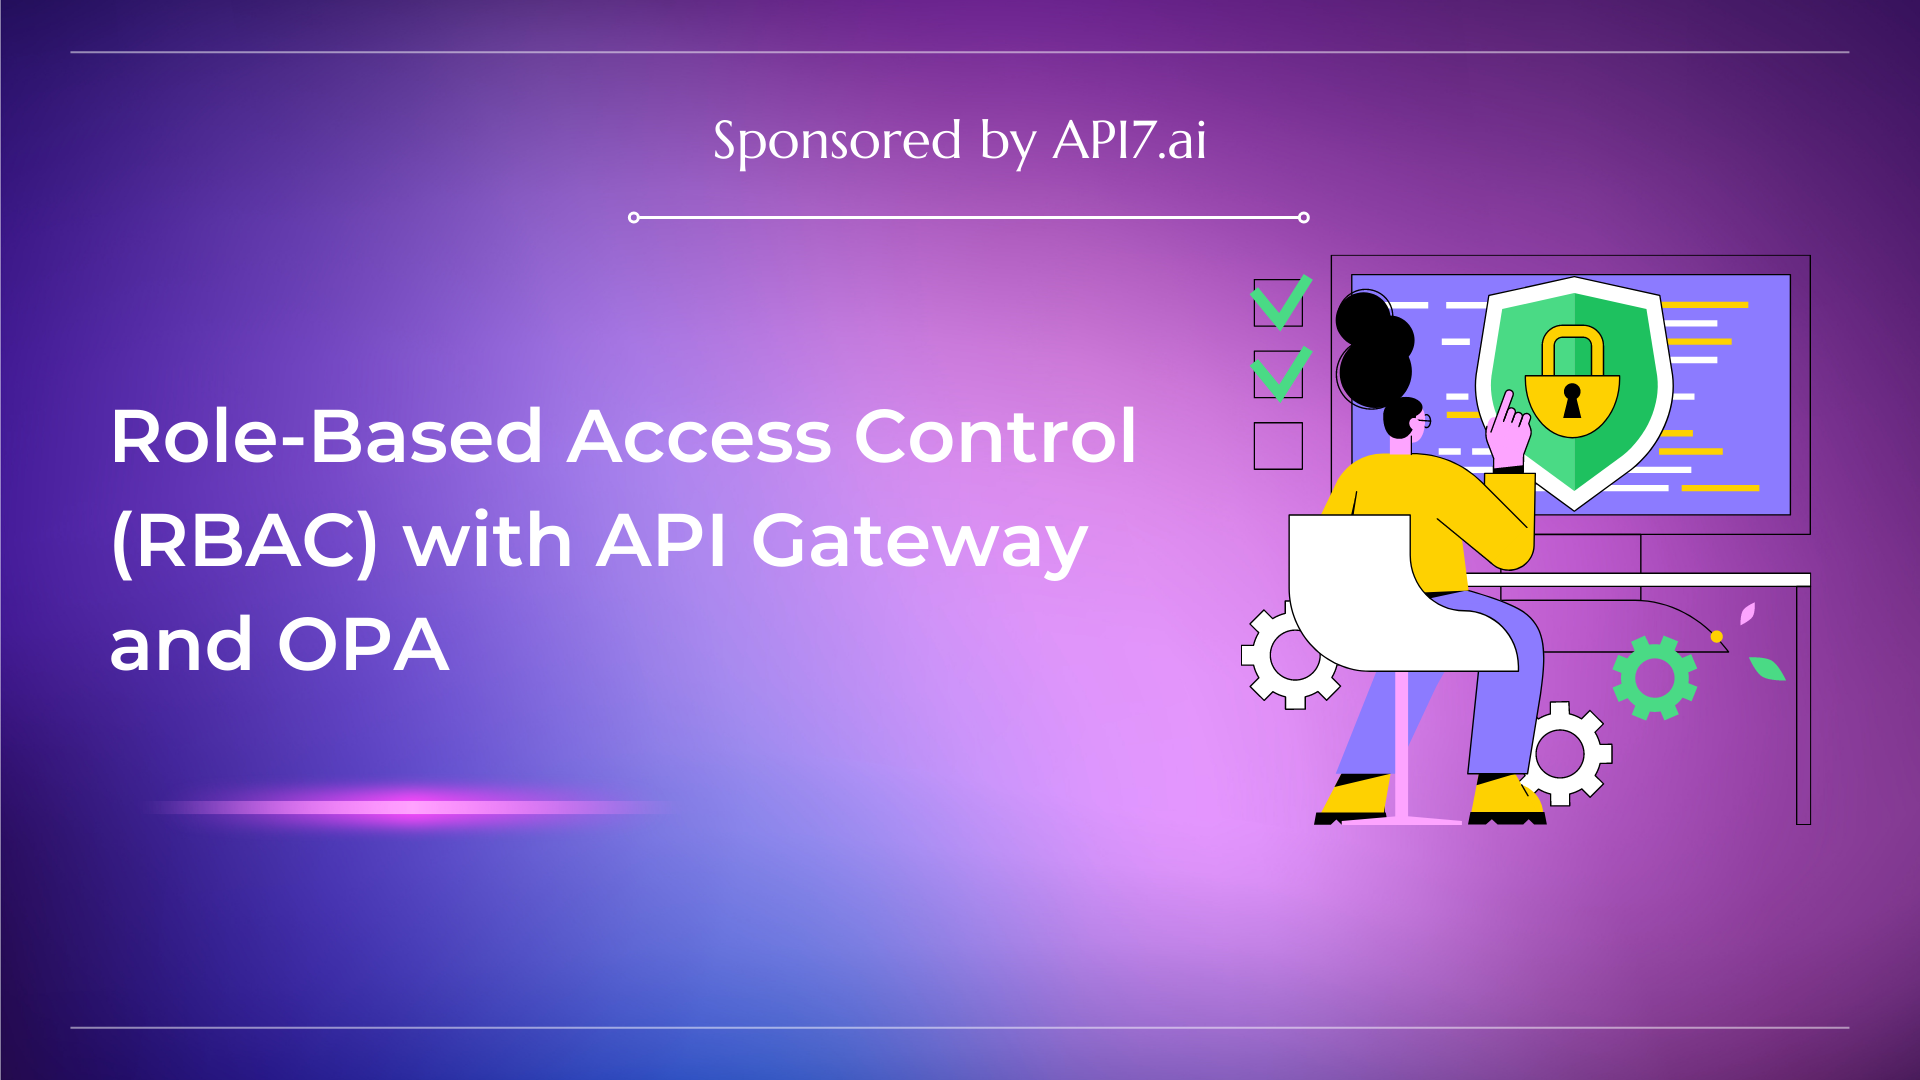 RBAC with API Gateway and Open Policy Agent (OPA)